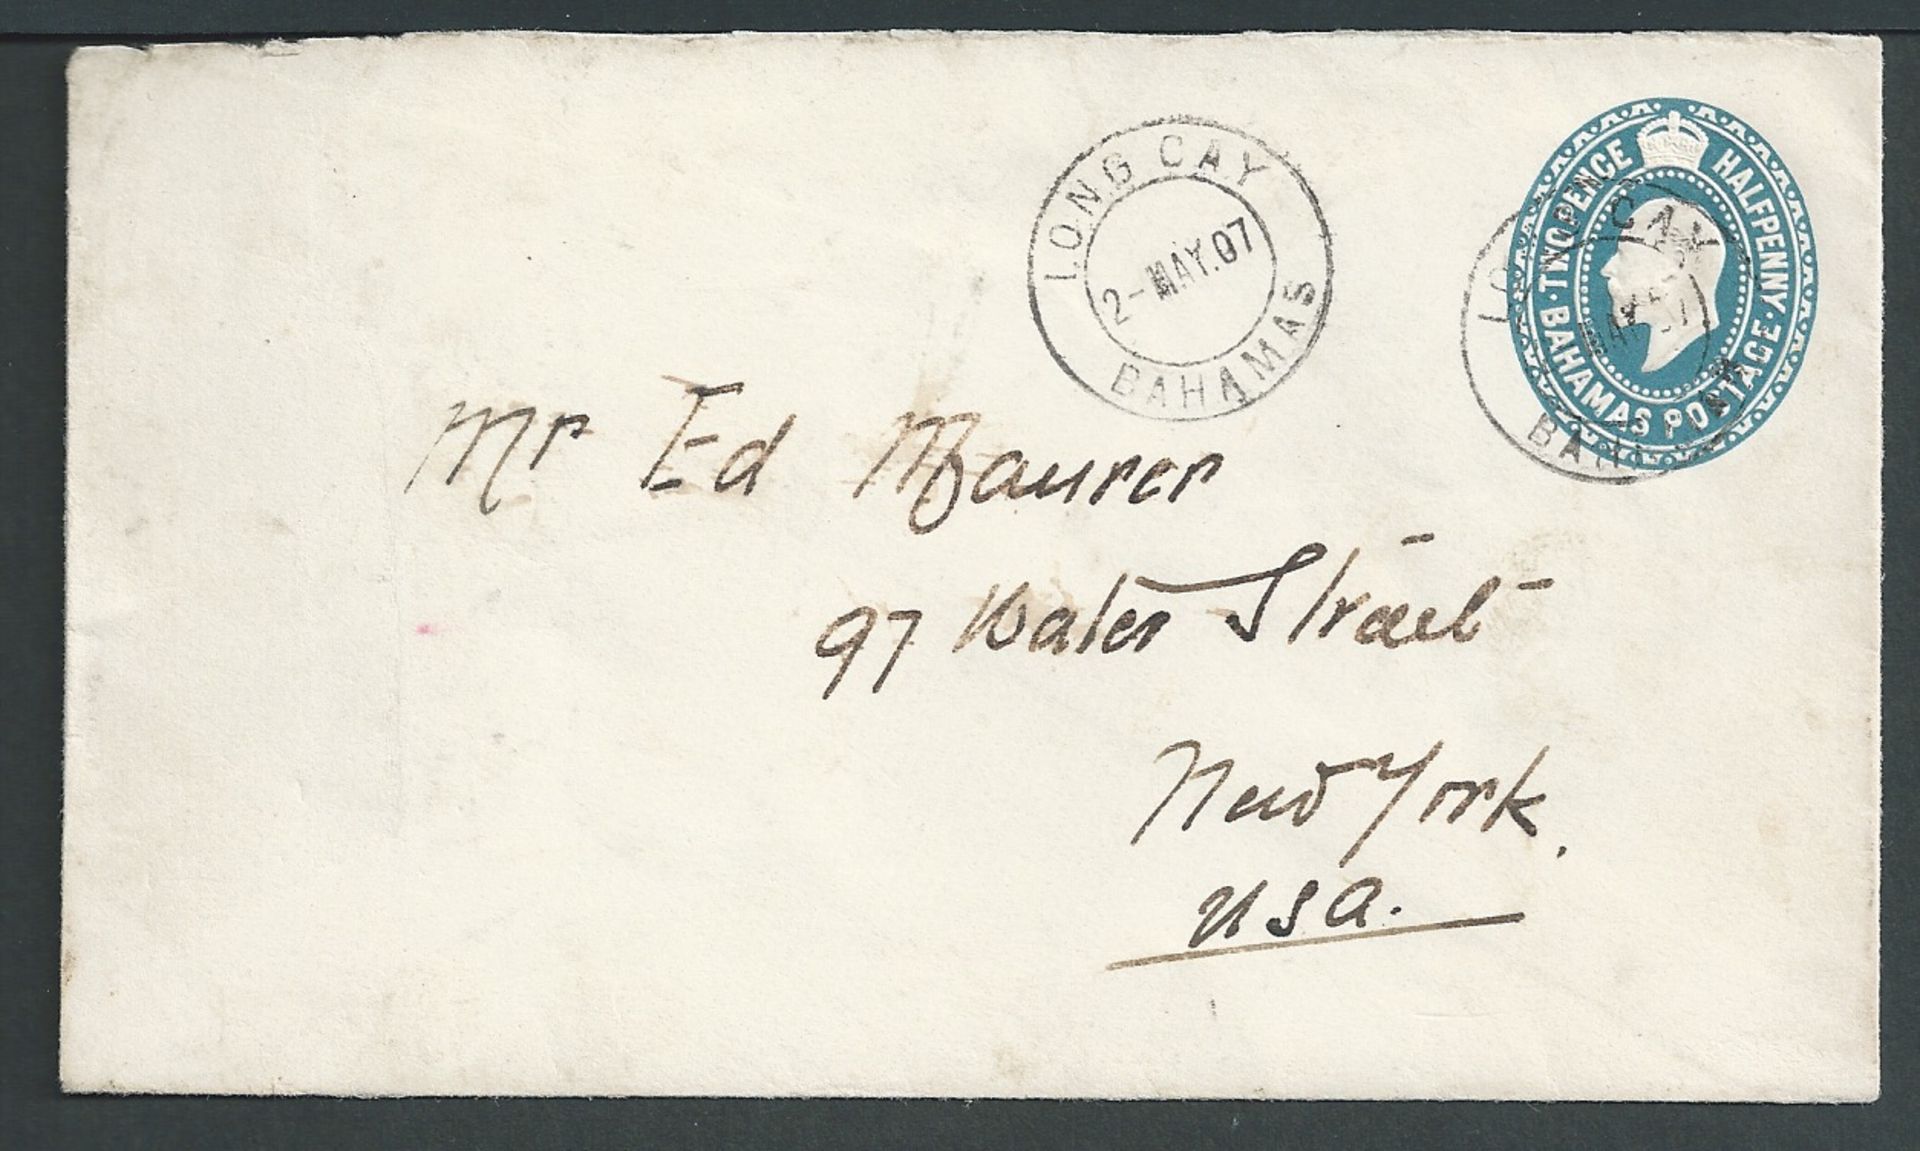 Bahamas 1907 2.1/2d Postal Stationery envelope to the U.S.A. cancelled by the uncommon